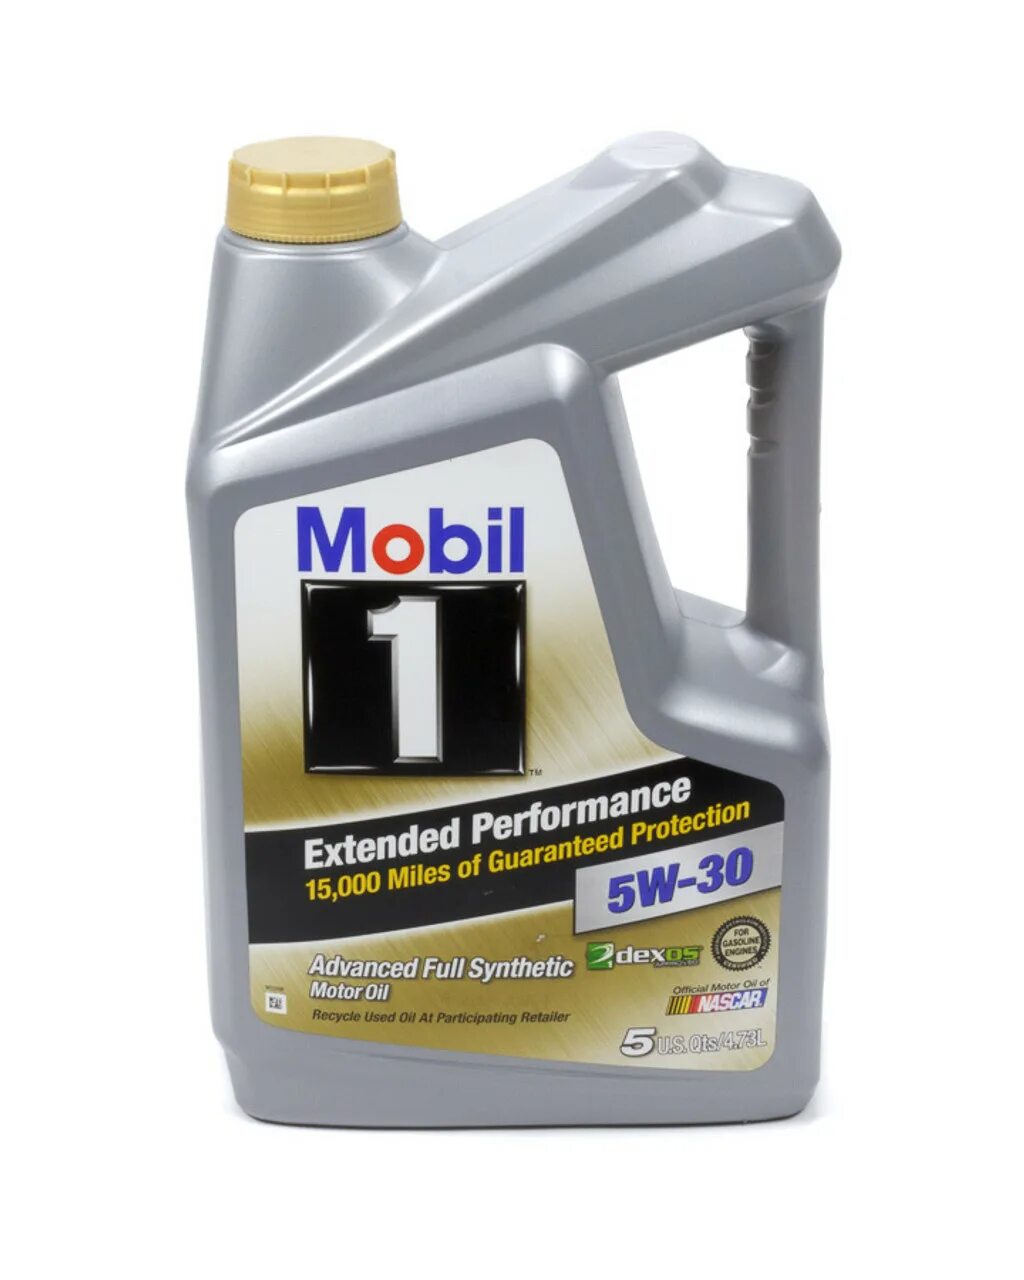 Mobil1 Extended Performance 5w-30. Масло фулл синтетик. Mobil1 Ep. Mobil 1 5w30 Extended Performance реклама.